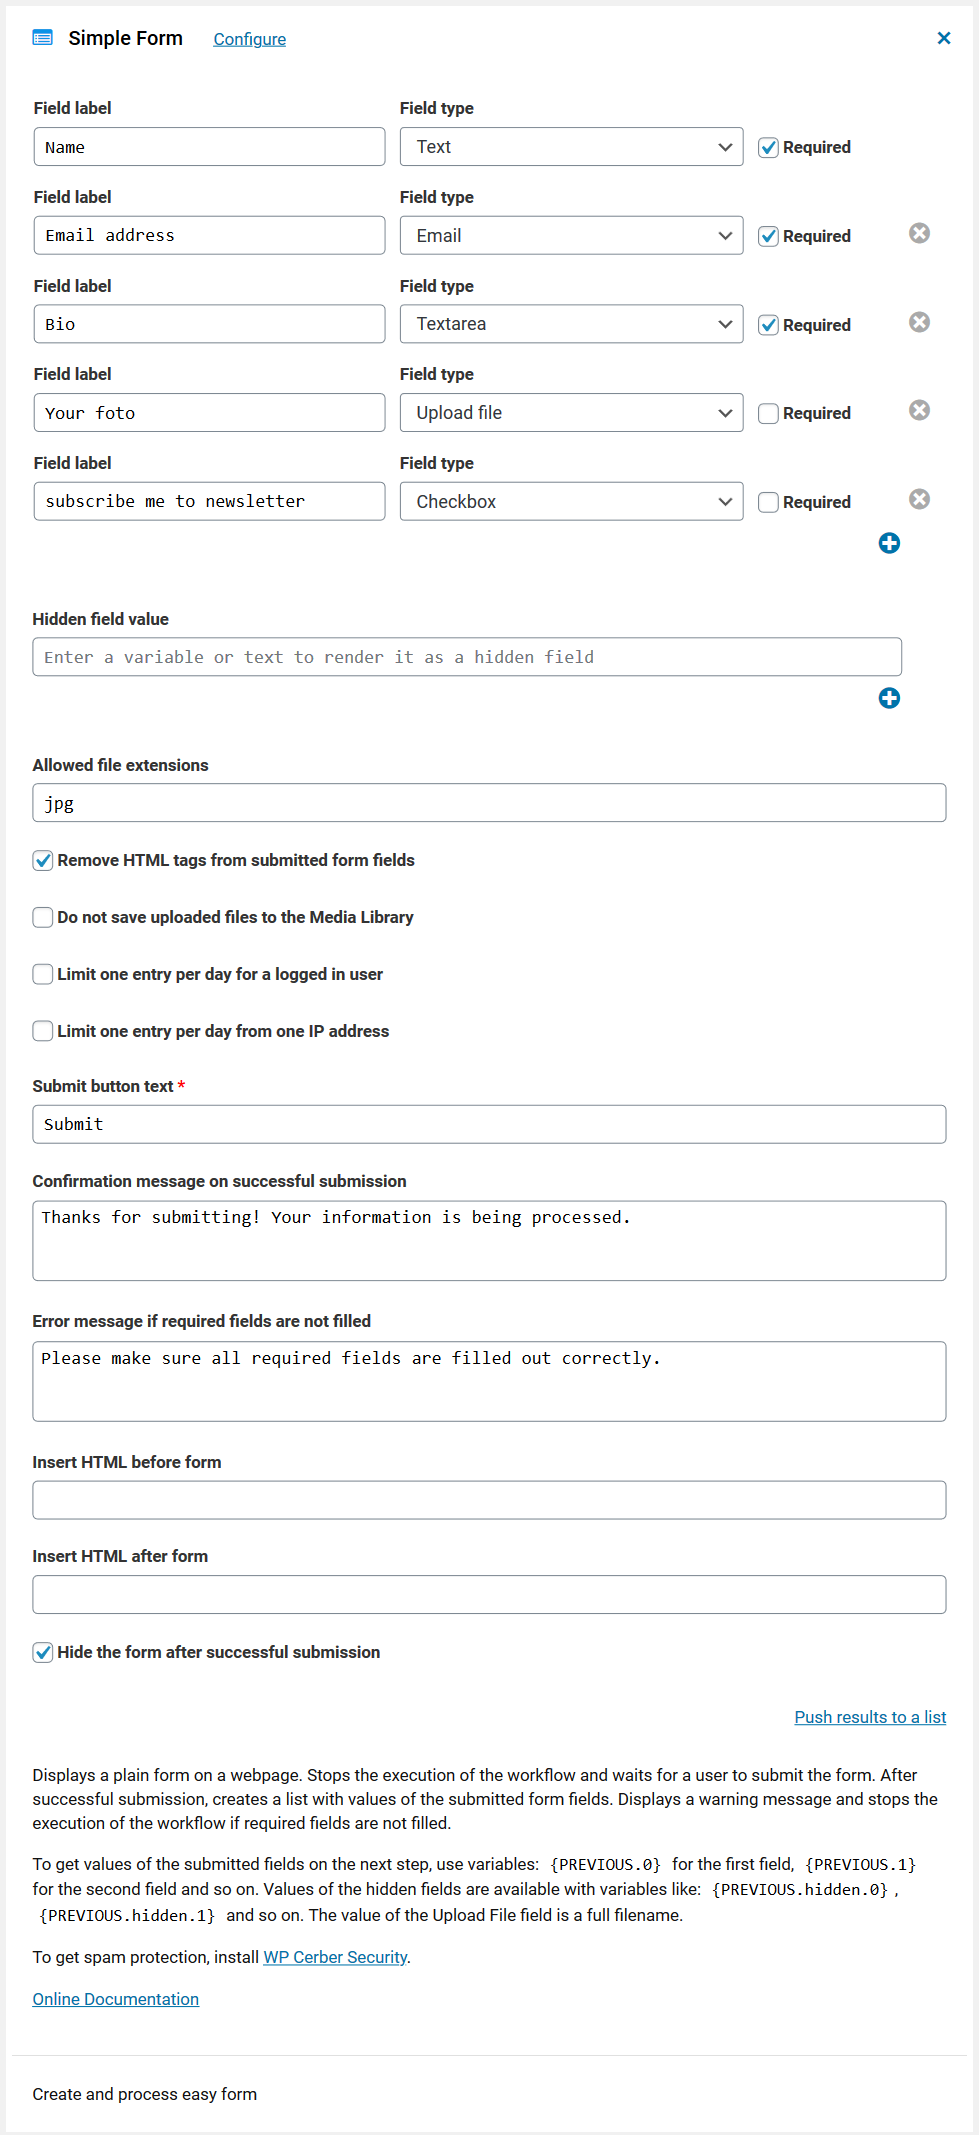 Configuring the Simple Form action in a WordPress automation workflow